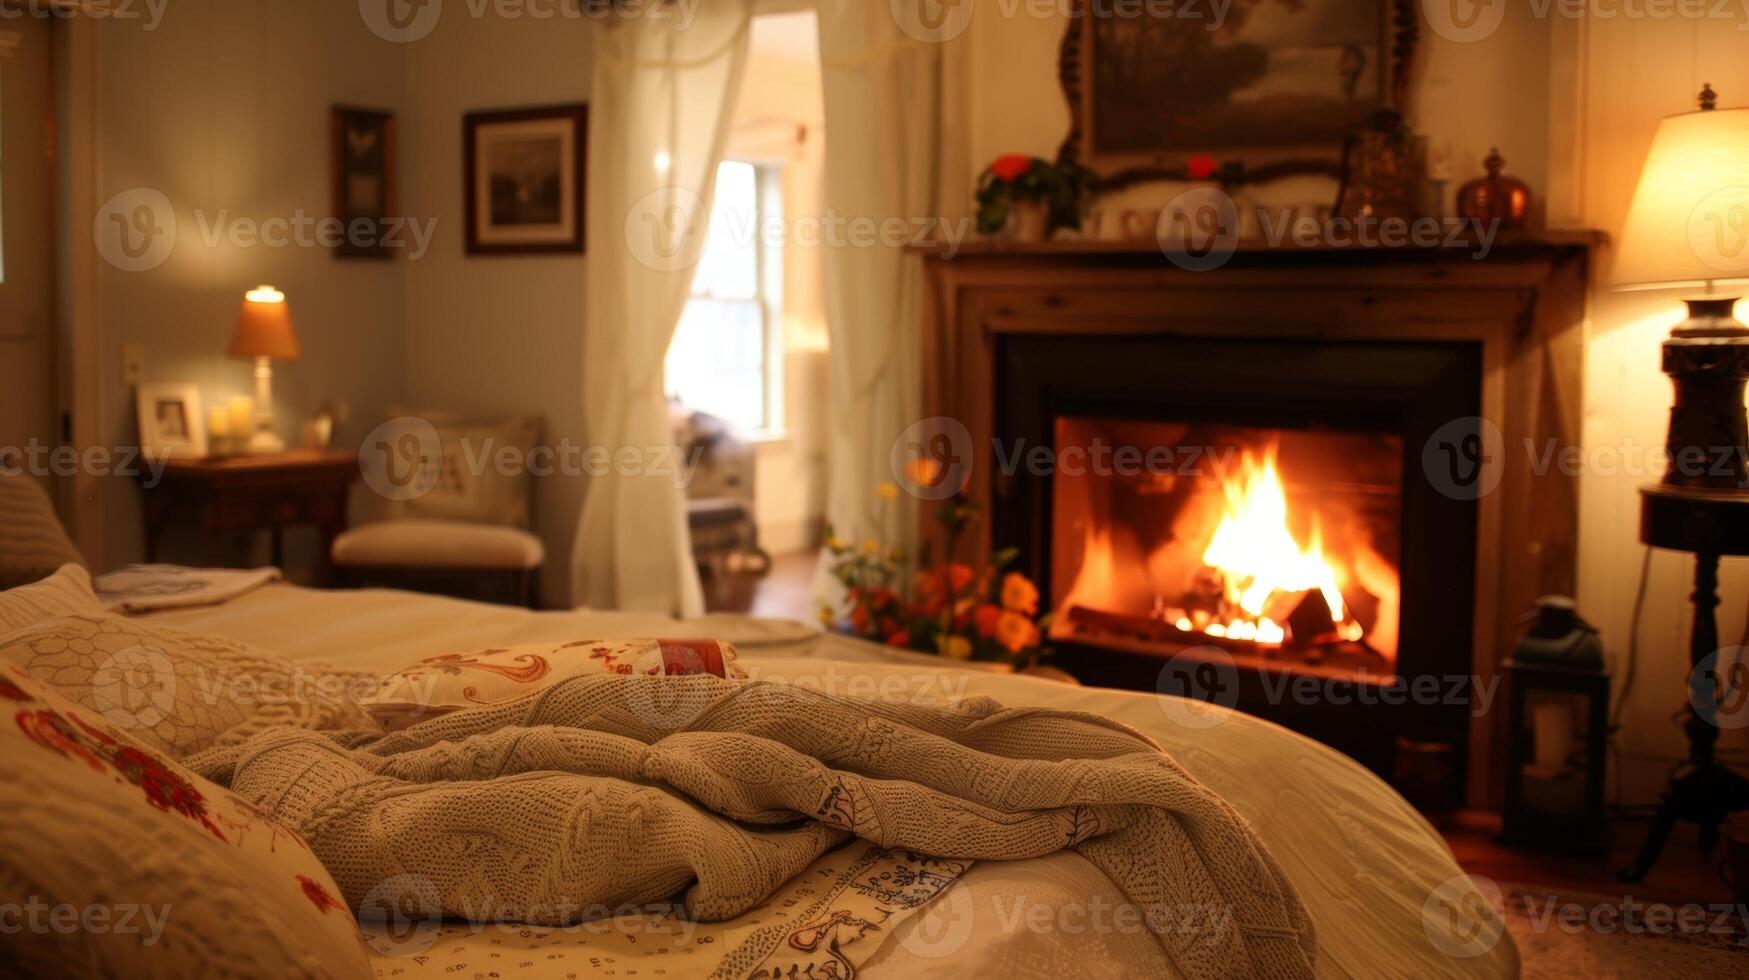 The flickering flames of the fireplace cast a soft light over the cozy bed and breakfast creating a tranquil and welcoming atmosphere. 2d flat cartoon photo